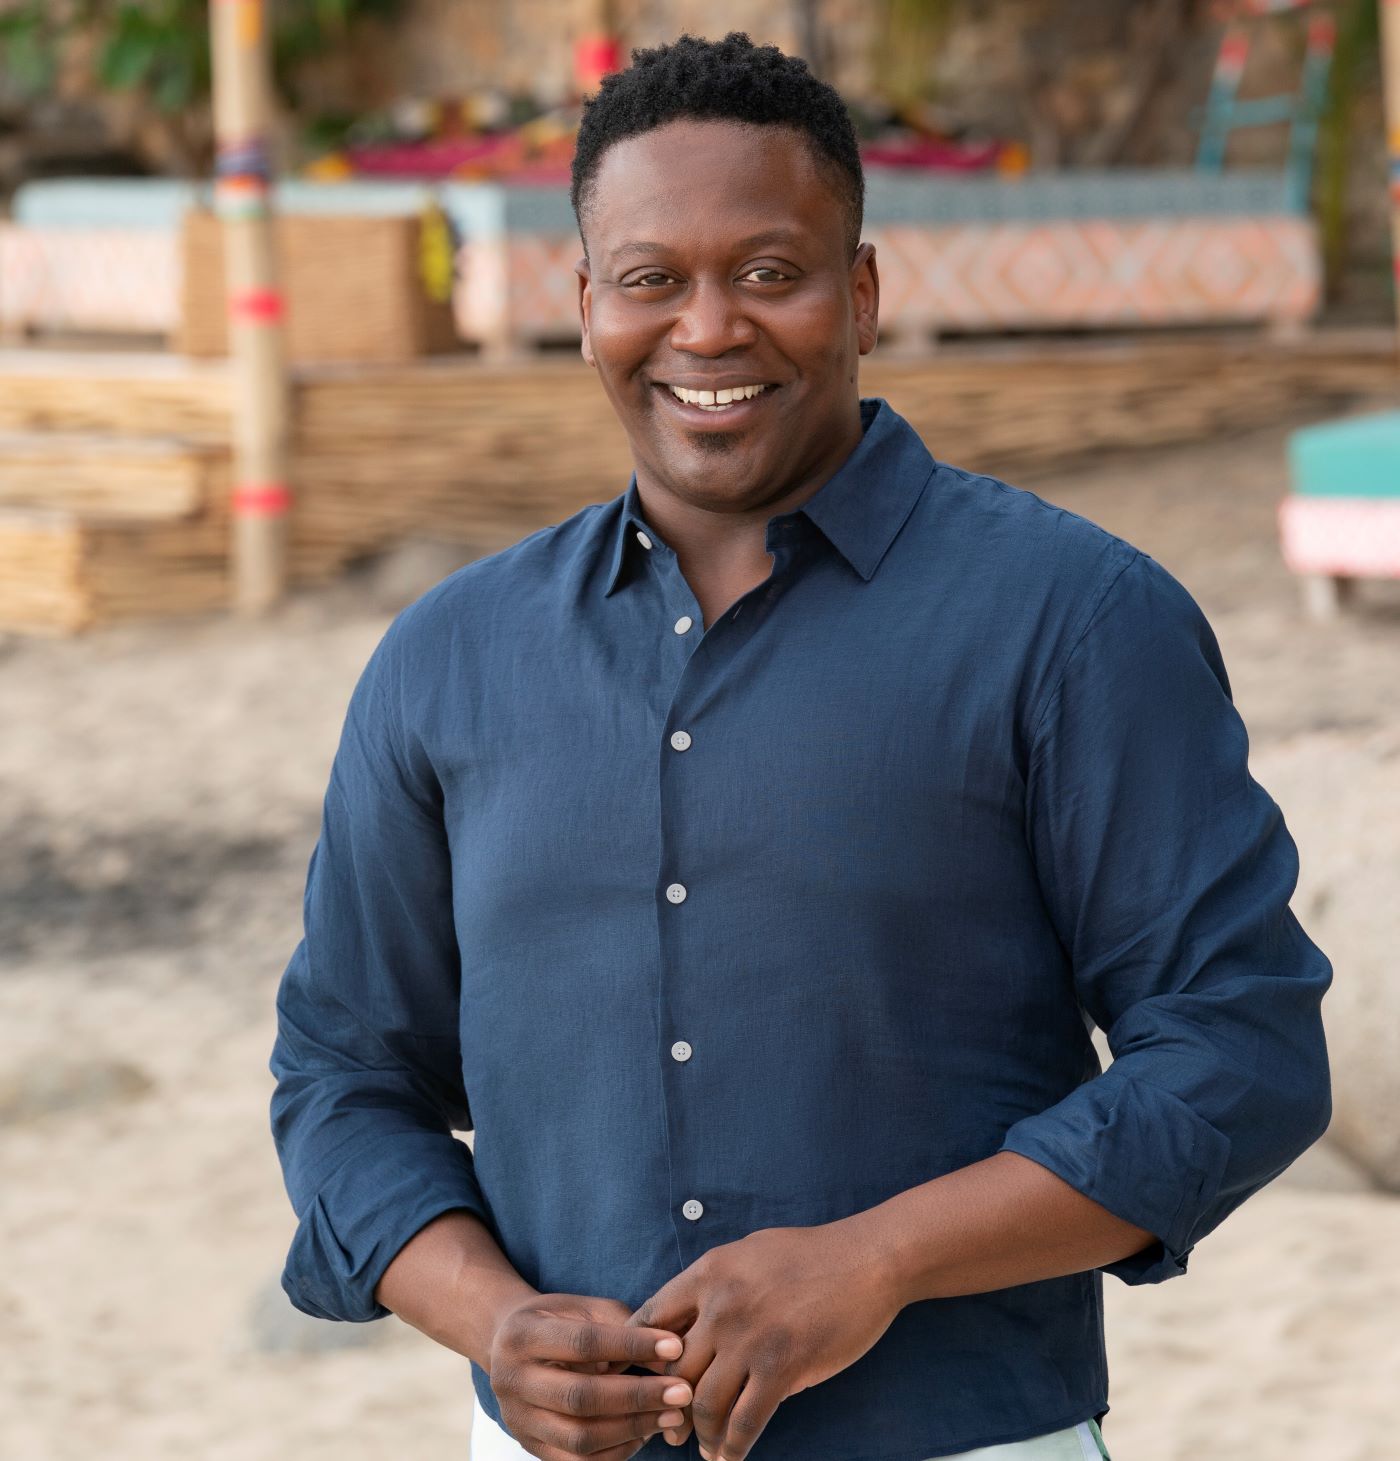 Tituss Burgess hosting 'Bachelor in Paradise' in a blue button up shirt